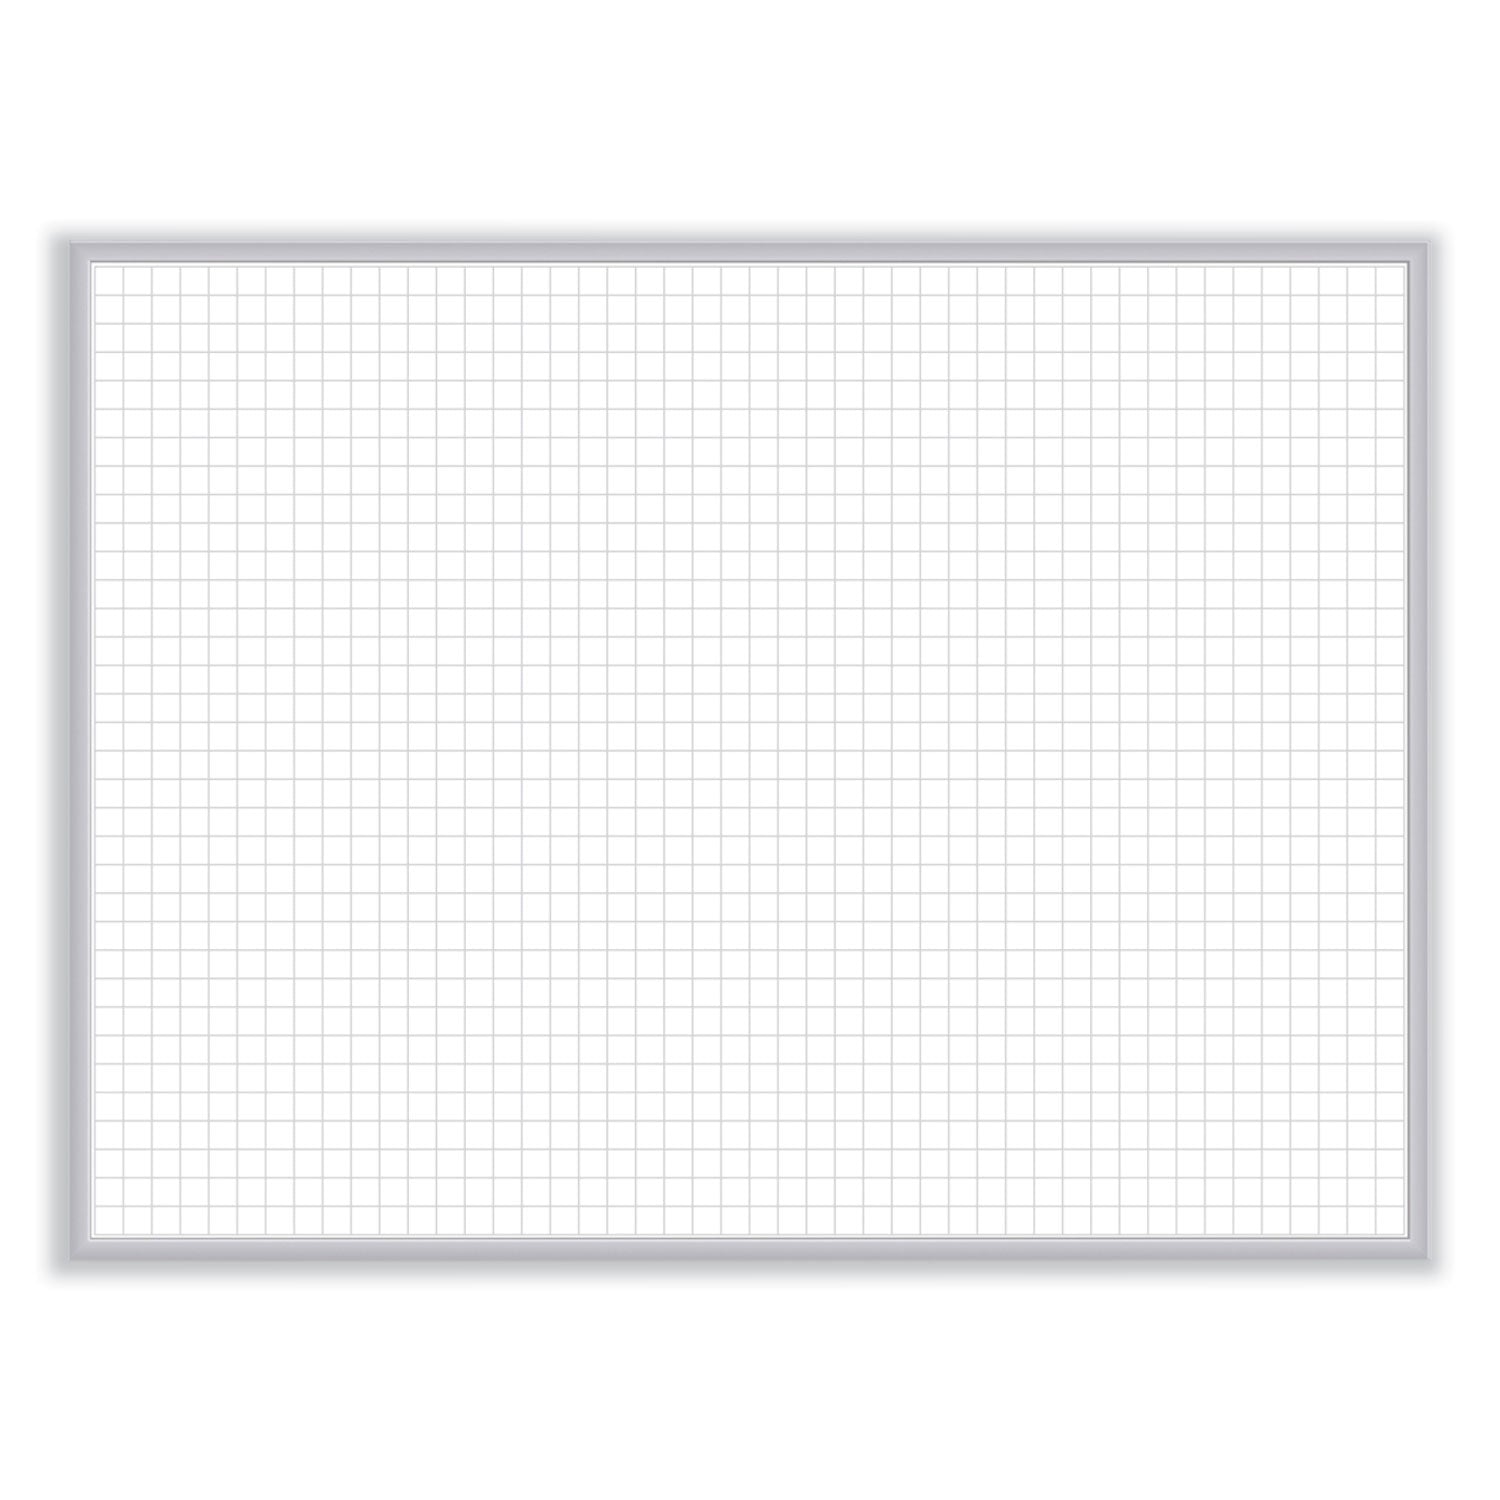 non-magnetic-whiteboard-with-aluminum-frame-12063-x-4863-white-surface-satin-aluminum-frame-ships-in-7-10-business-days_ghem24104 - 1